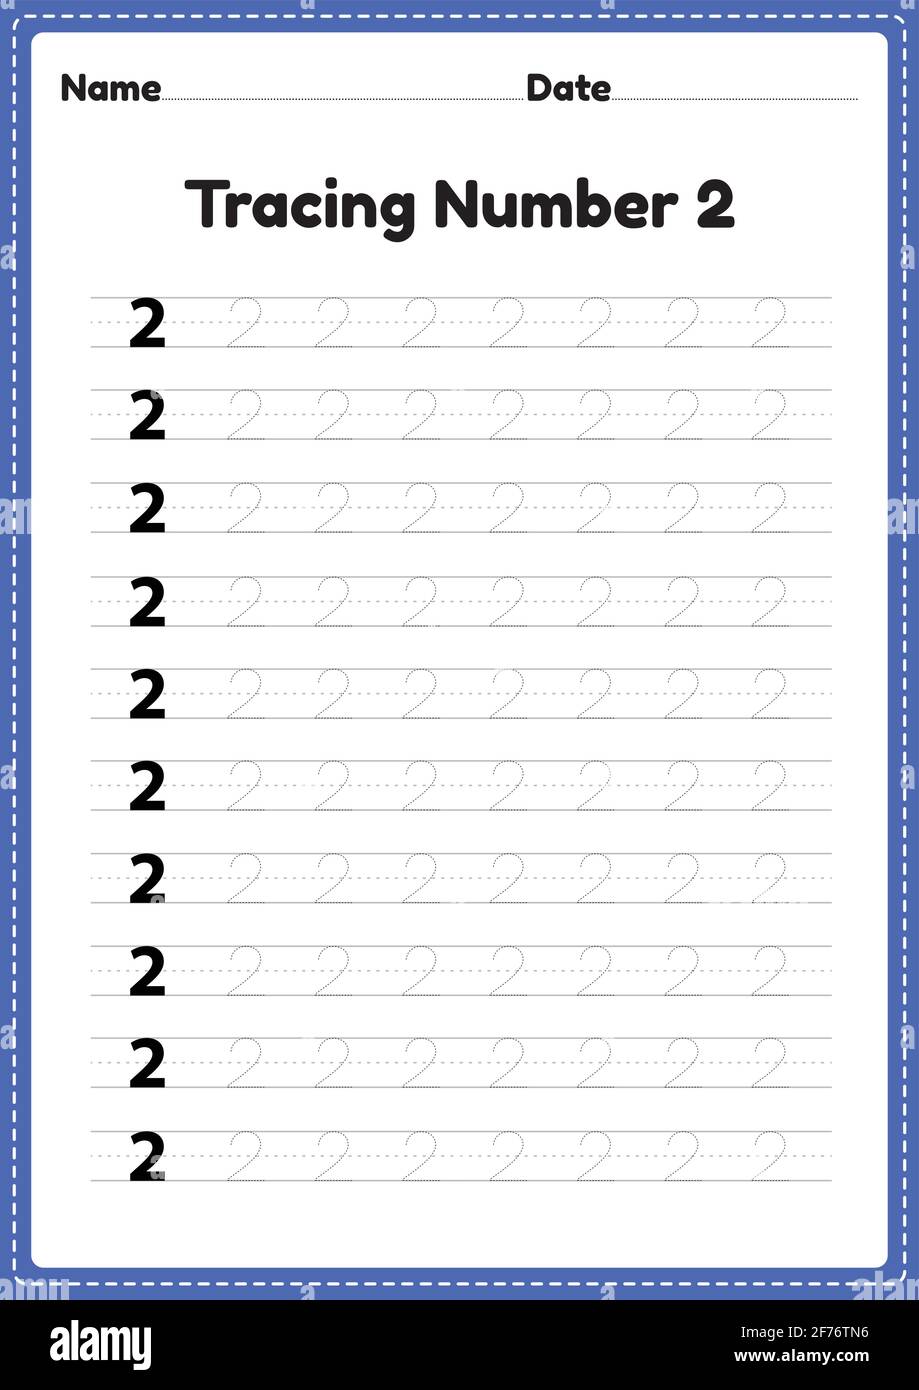 Tracing number 2 worksheet for kindergarten and preschool kids for educational handwriting practice in a printable page. Stock Vector